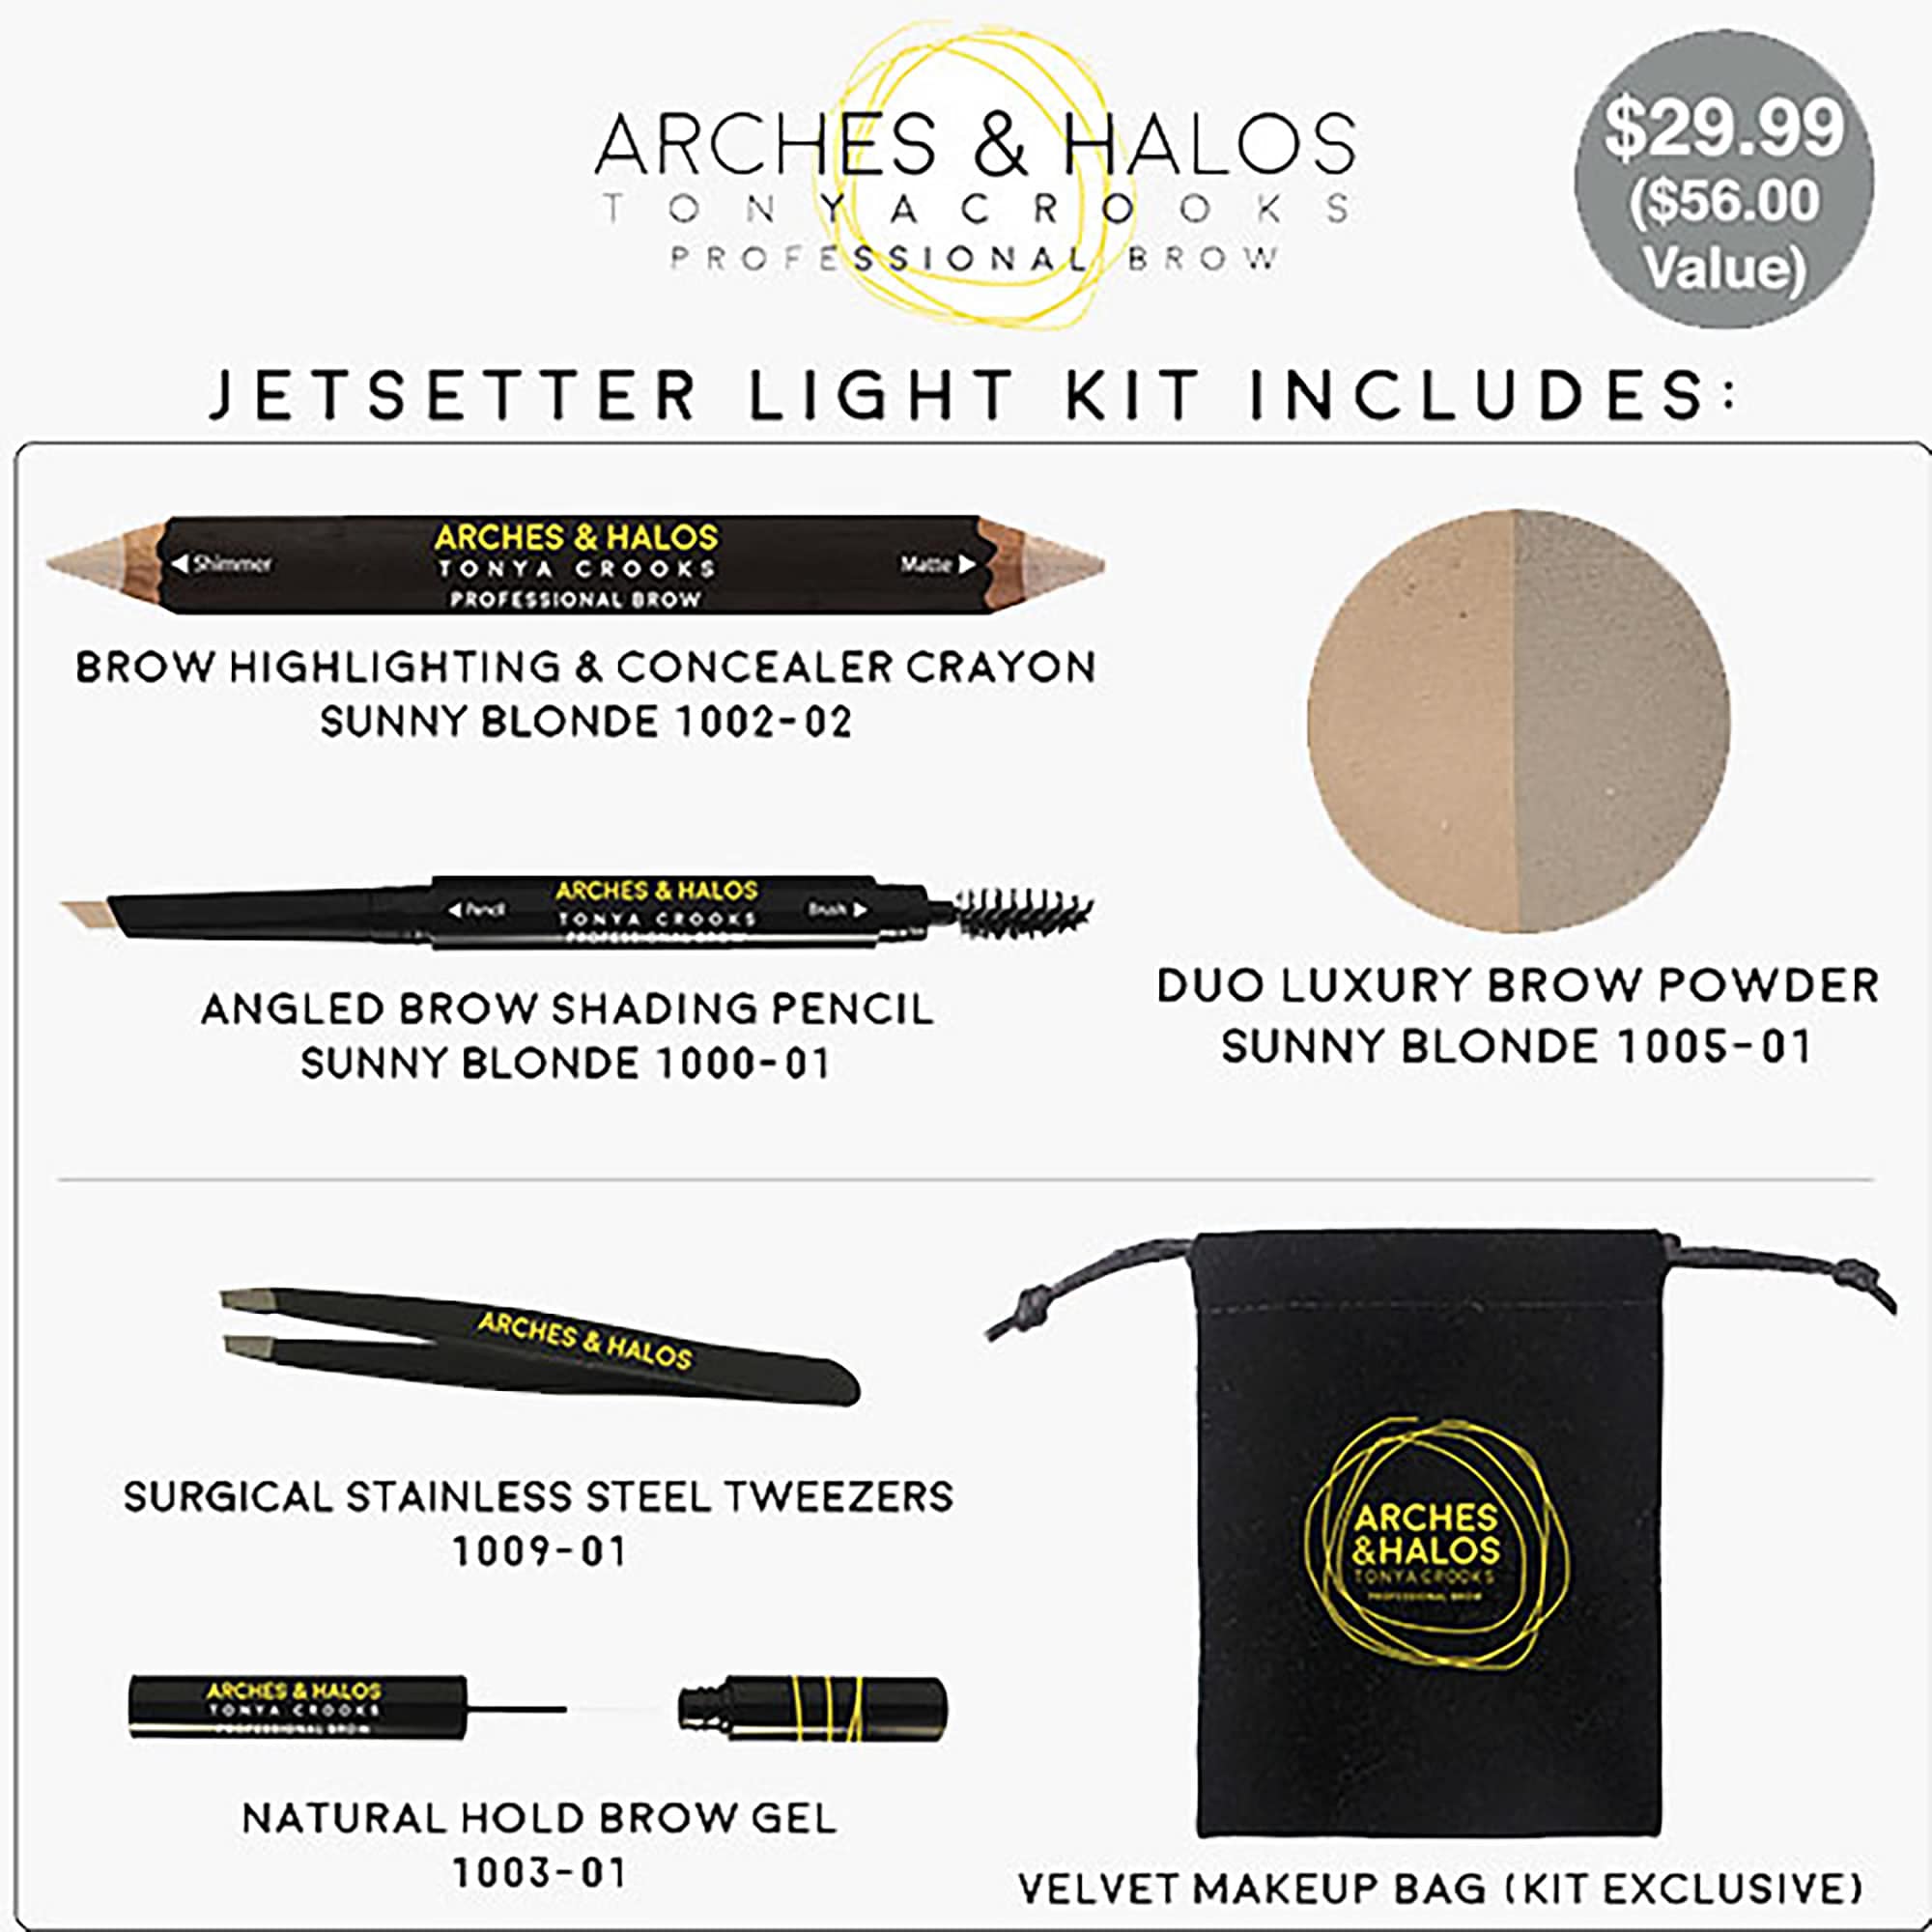 Arches & Halos Jetsetter Kit - Travel Size Kit for Flawless Brow Shaping and Grooming On the Go - Includes Five Essential Eyebrow Care Tools - Professional Grade Formulas and Design - Light - 1 pc